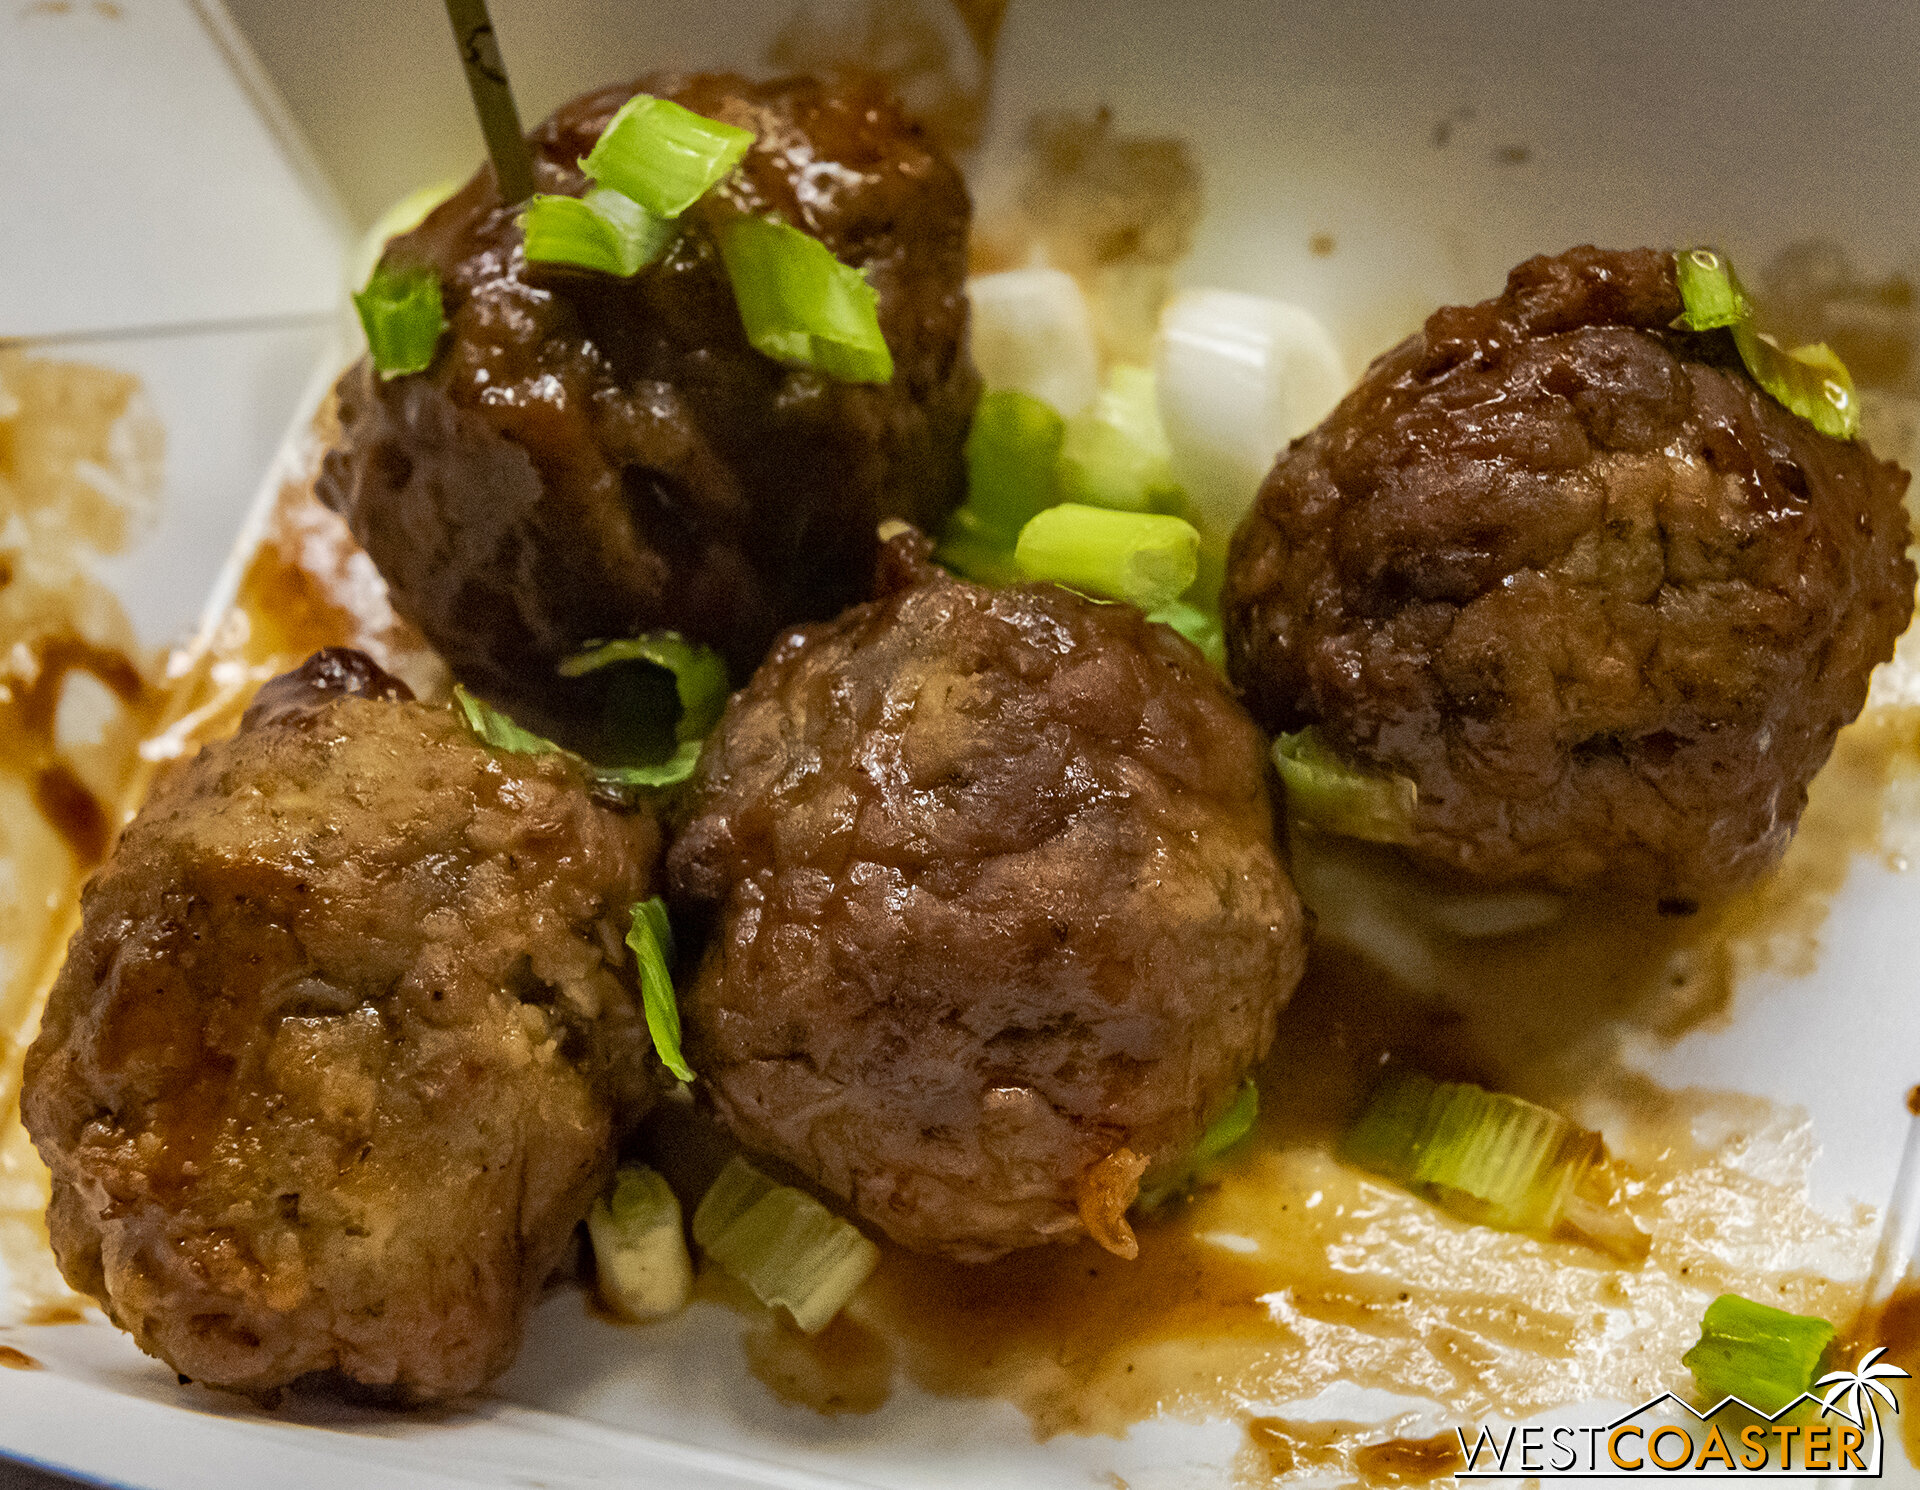  Boysenberry All Beef Meatballs, from Wagon Wheel Pizza. 